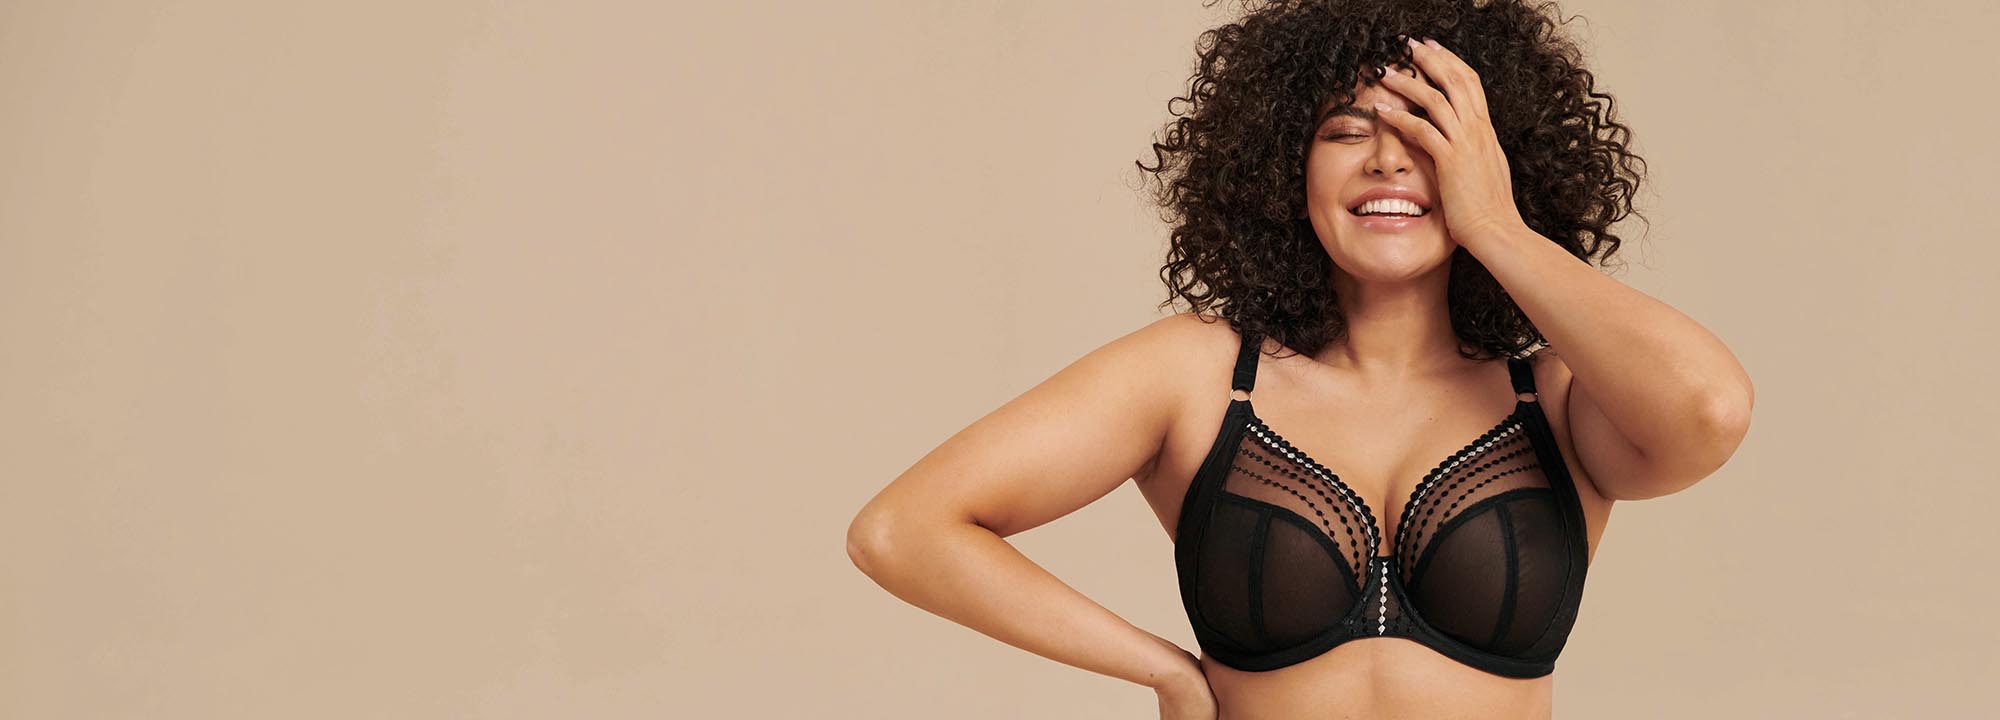 Elomi Brianna Underwire Padded Half Cup Bra in Black - Busted Bra Shop